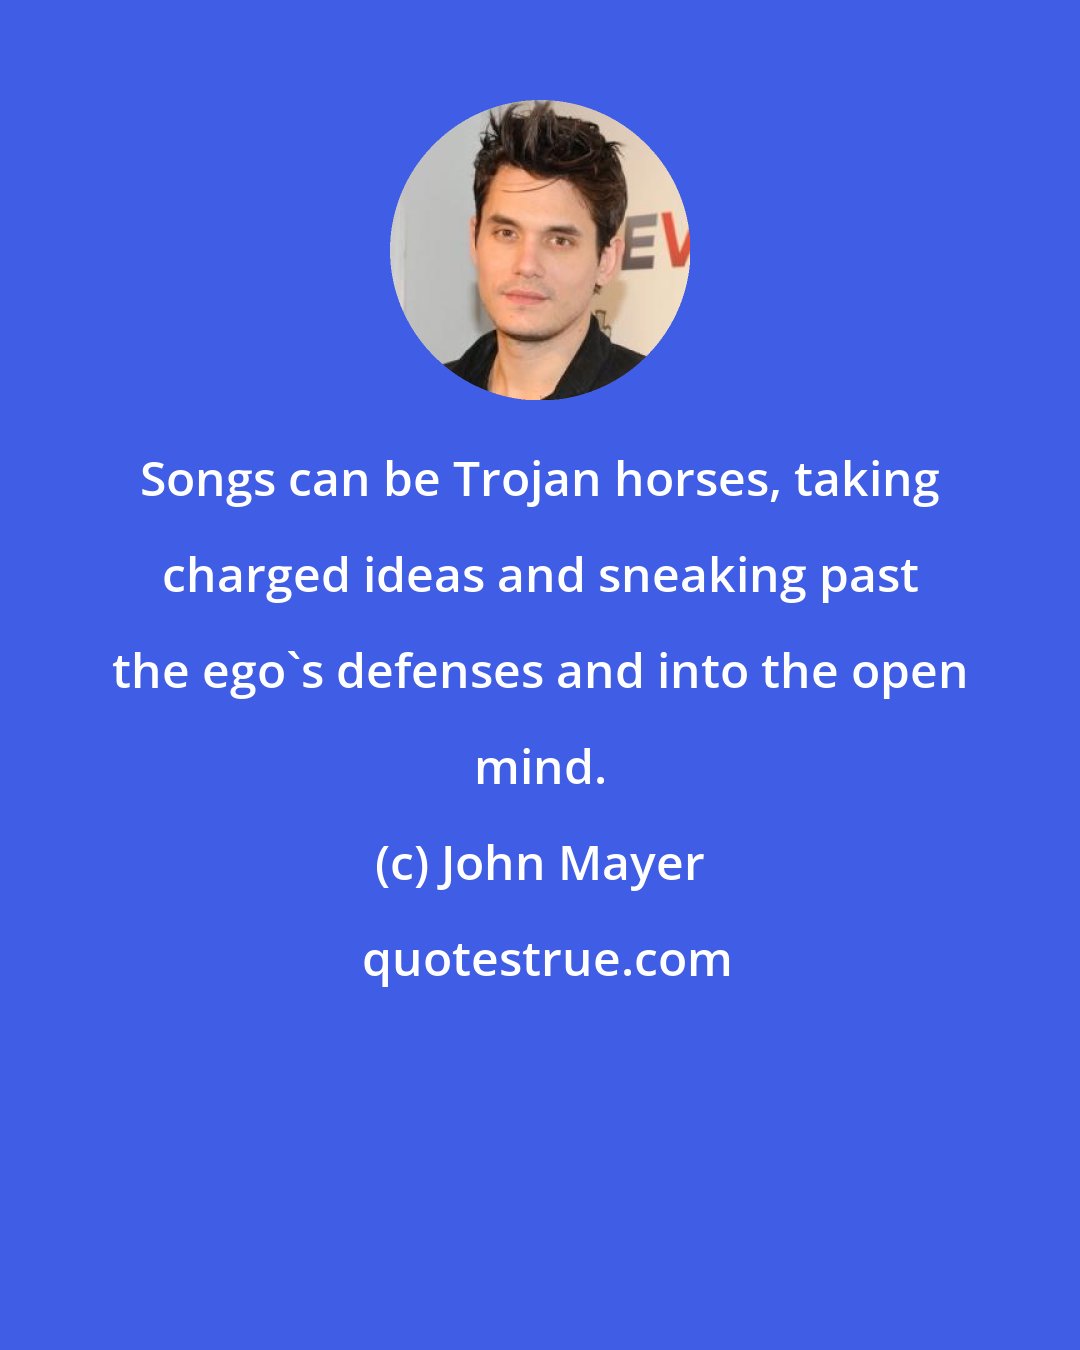 John Mayer: Songs can be Trojan horses, taking charged ideas and sneaking past the ego's defenses and into the open mind.